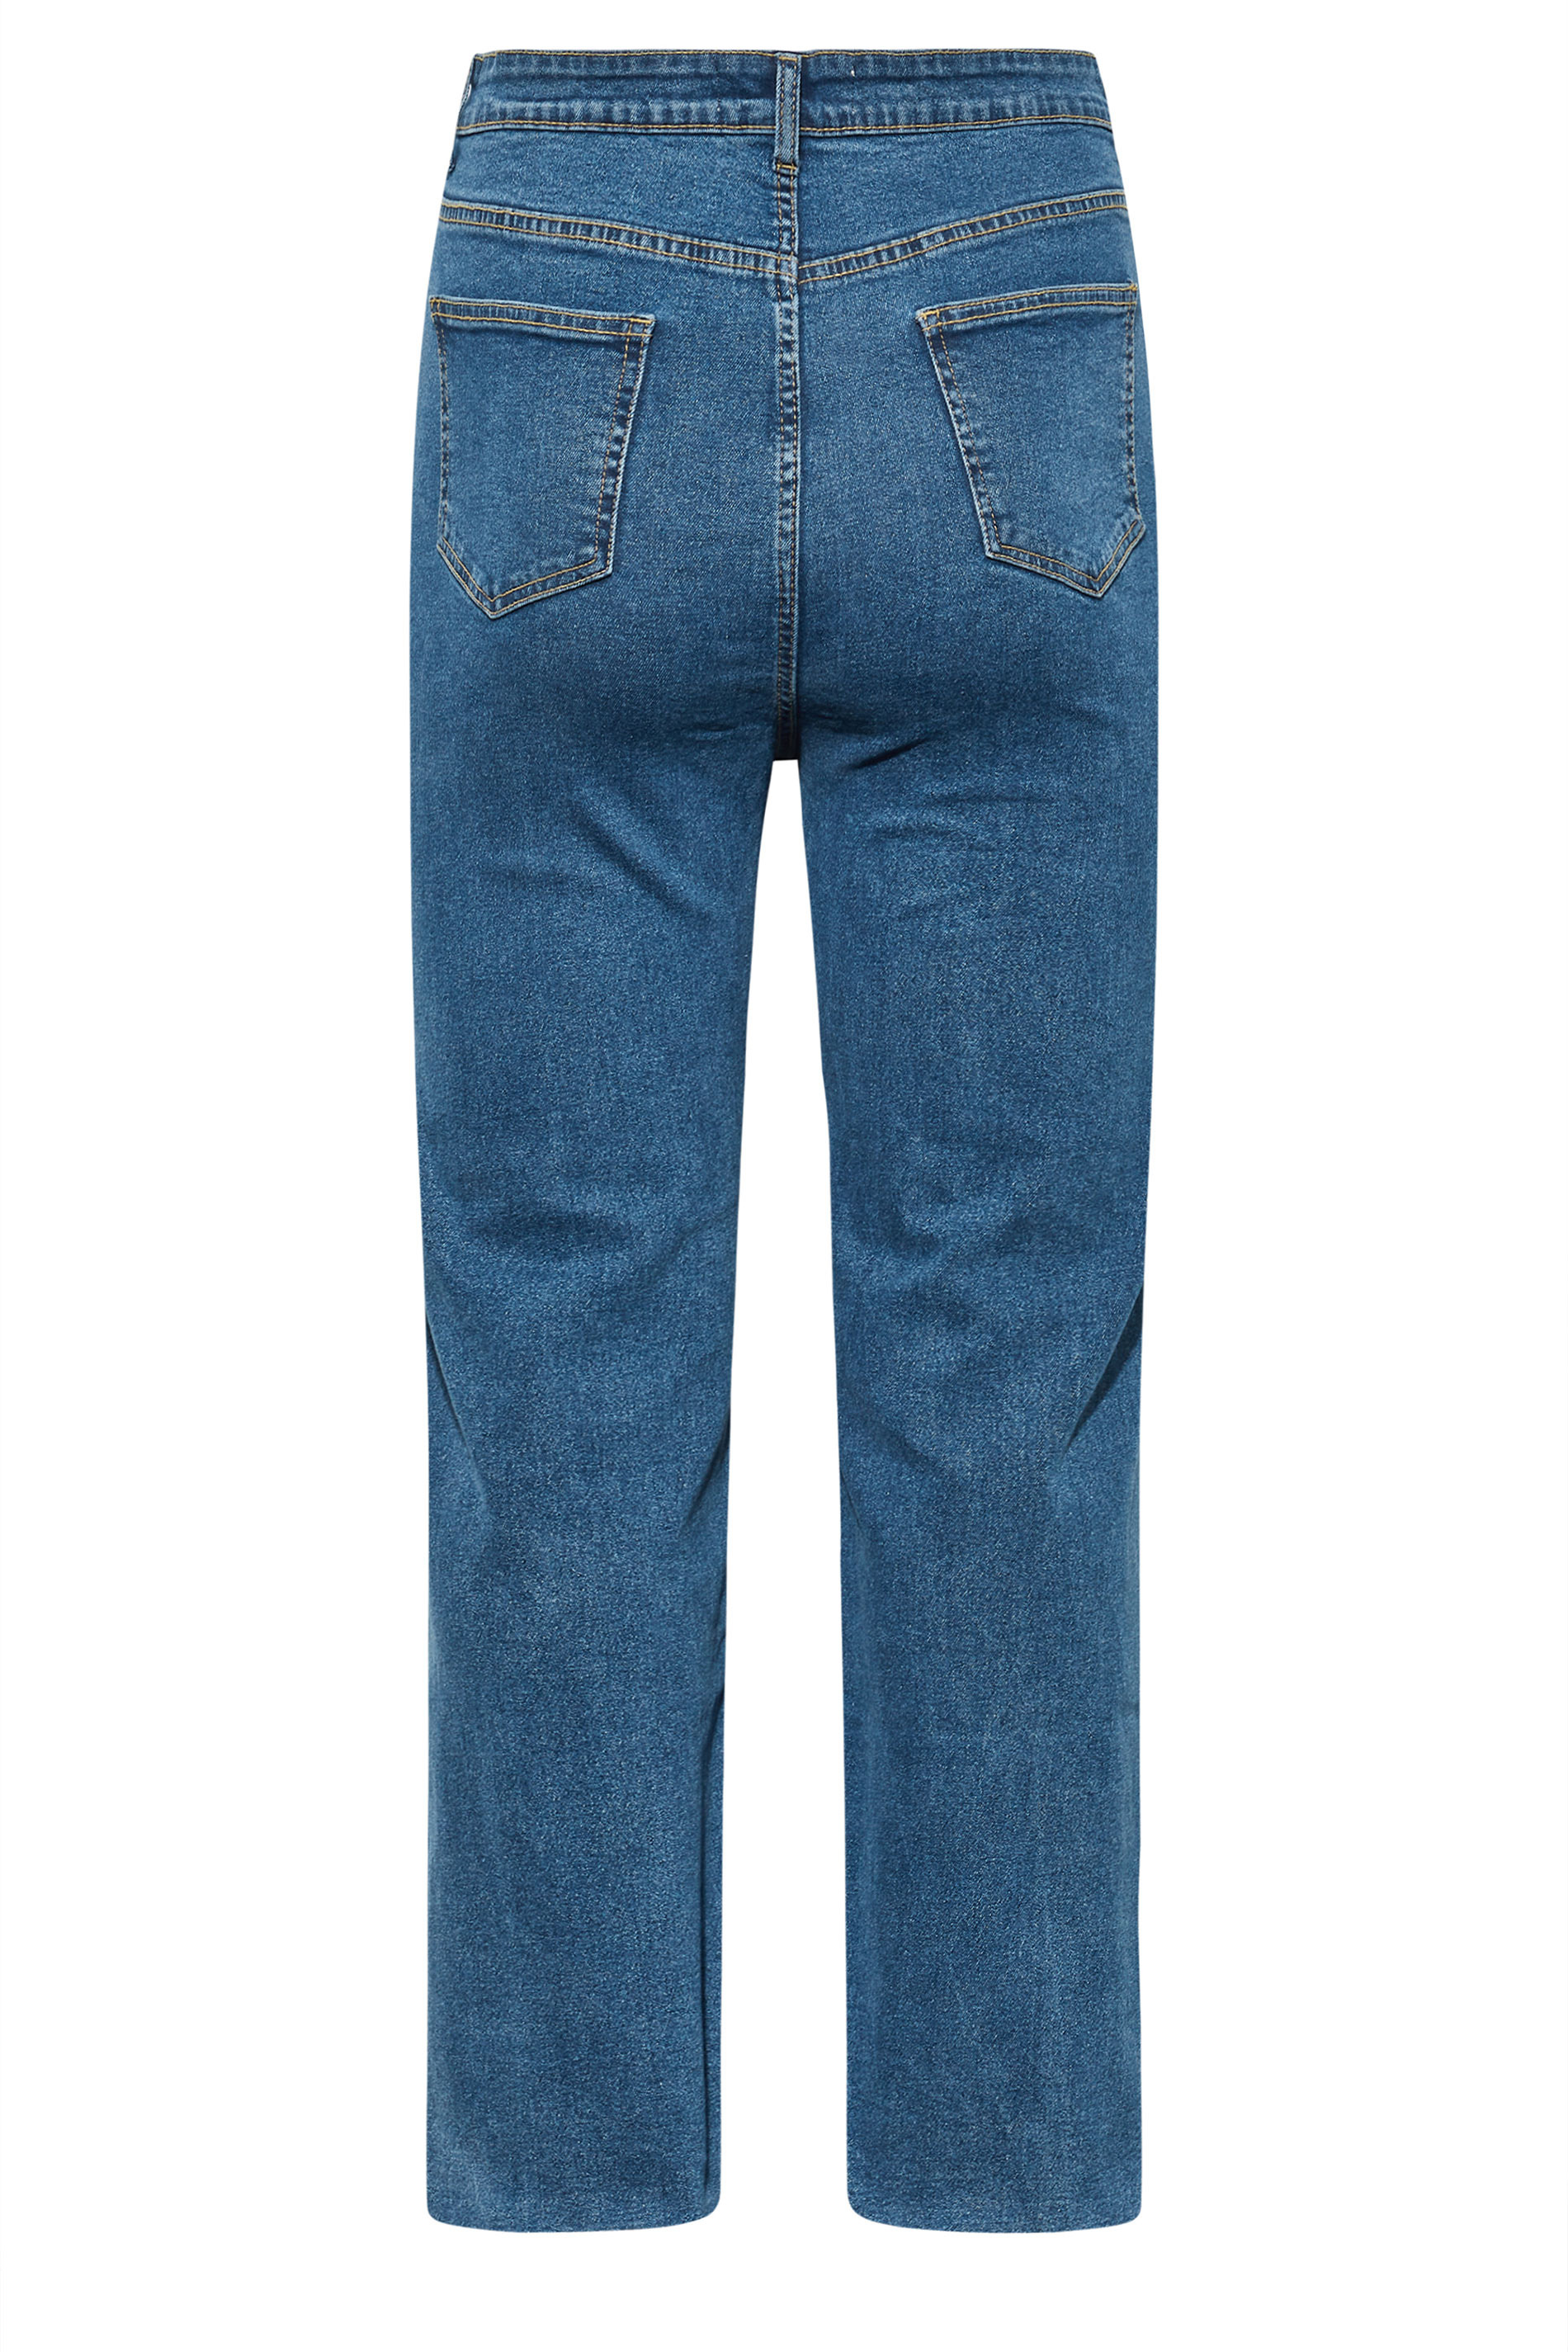 YOURS Curve Mid Blue Ripped Stretch Wide Leg Jeans